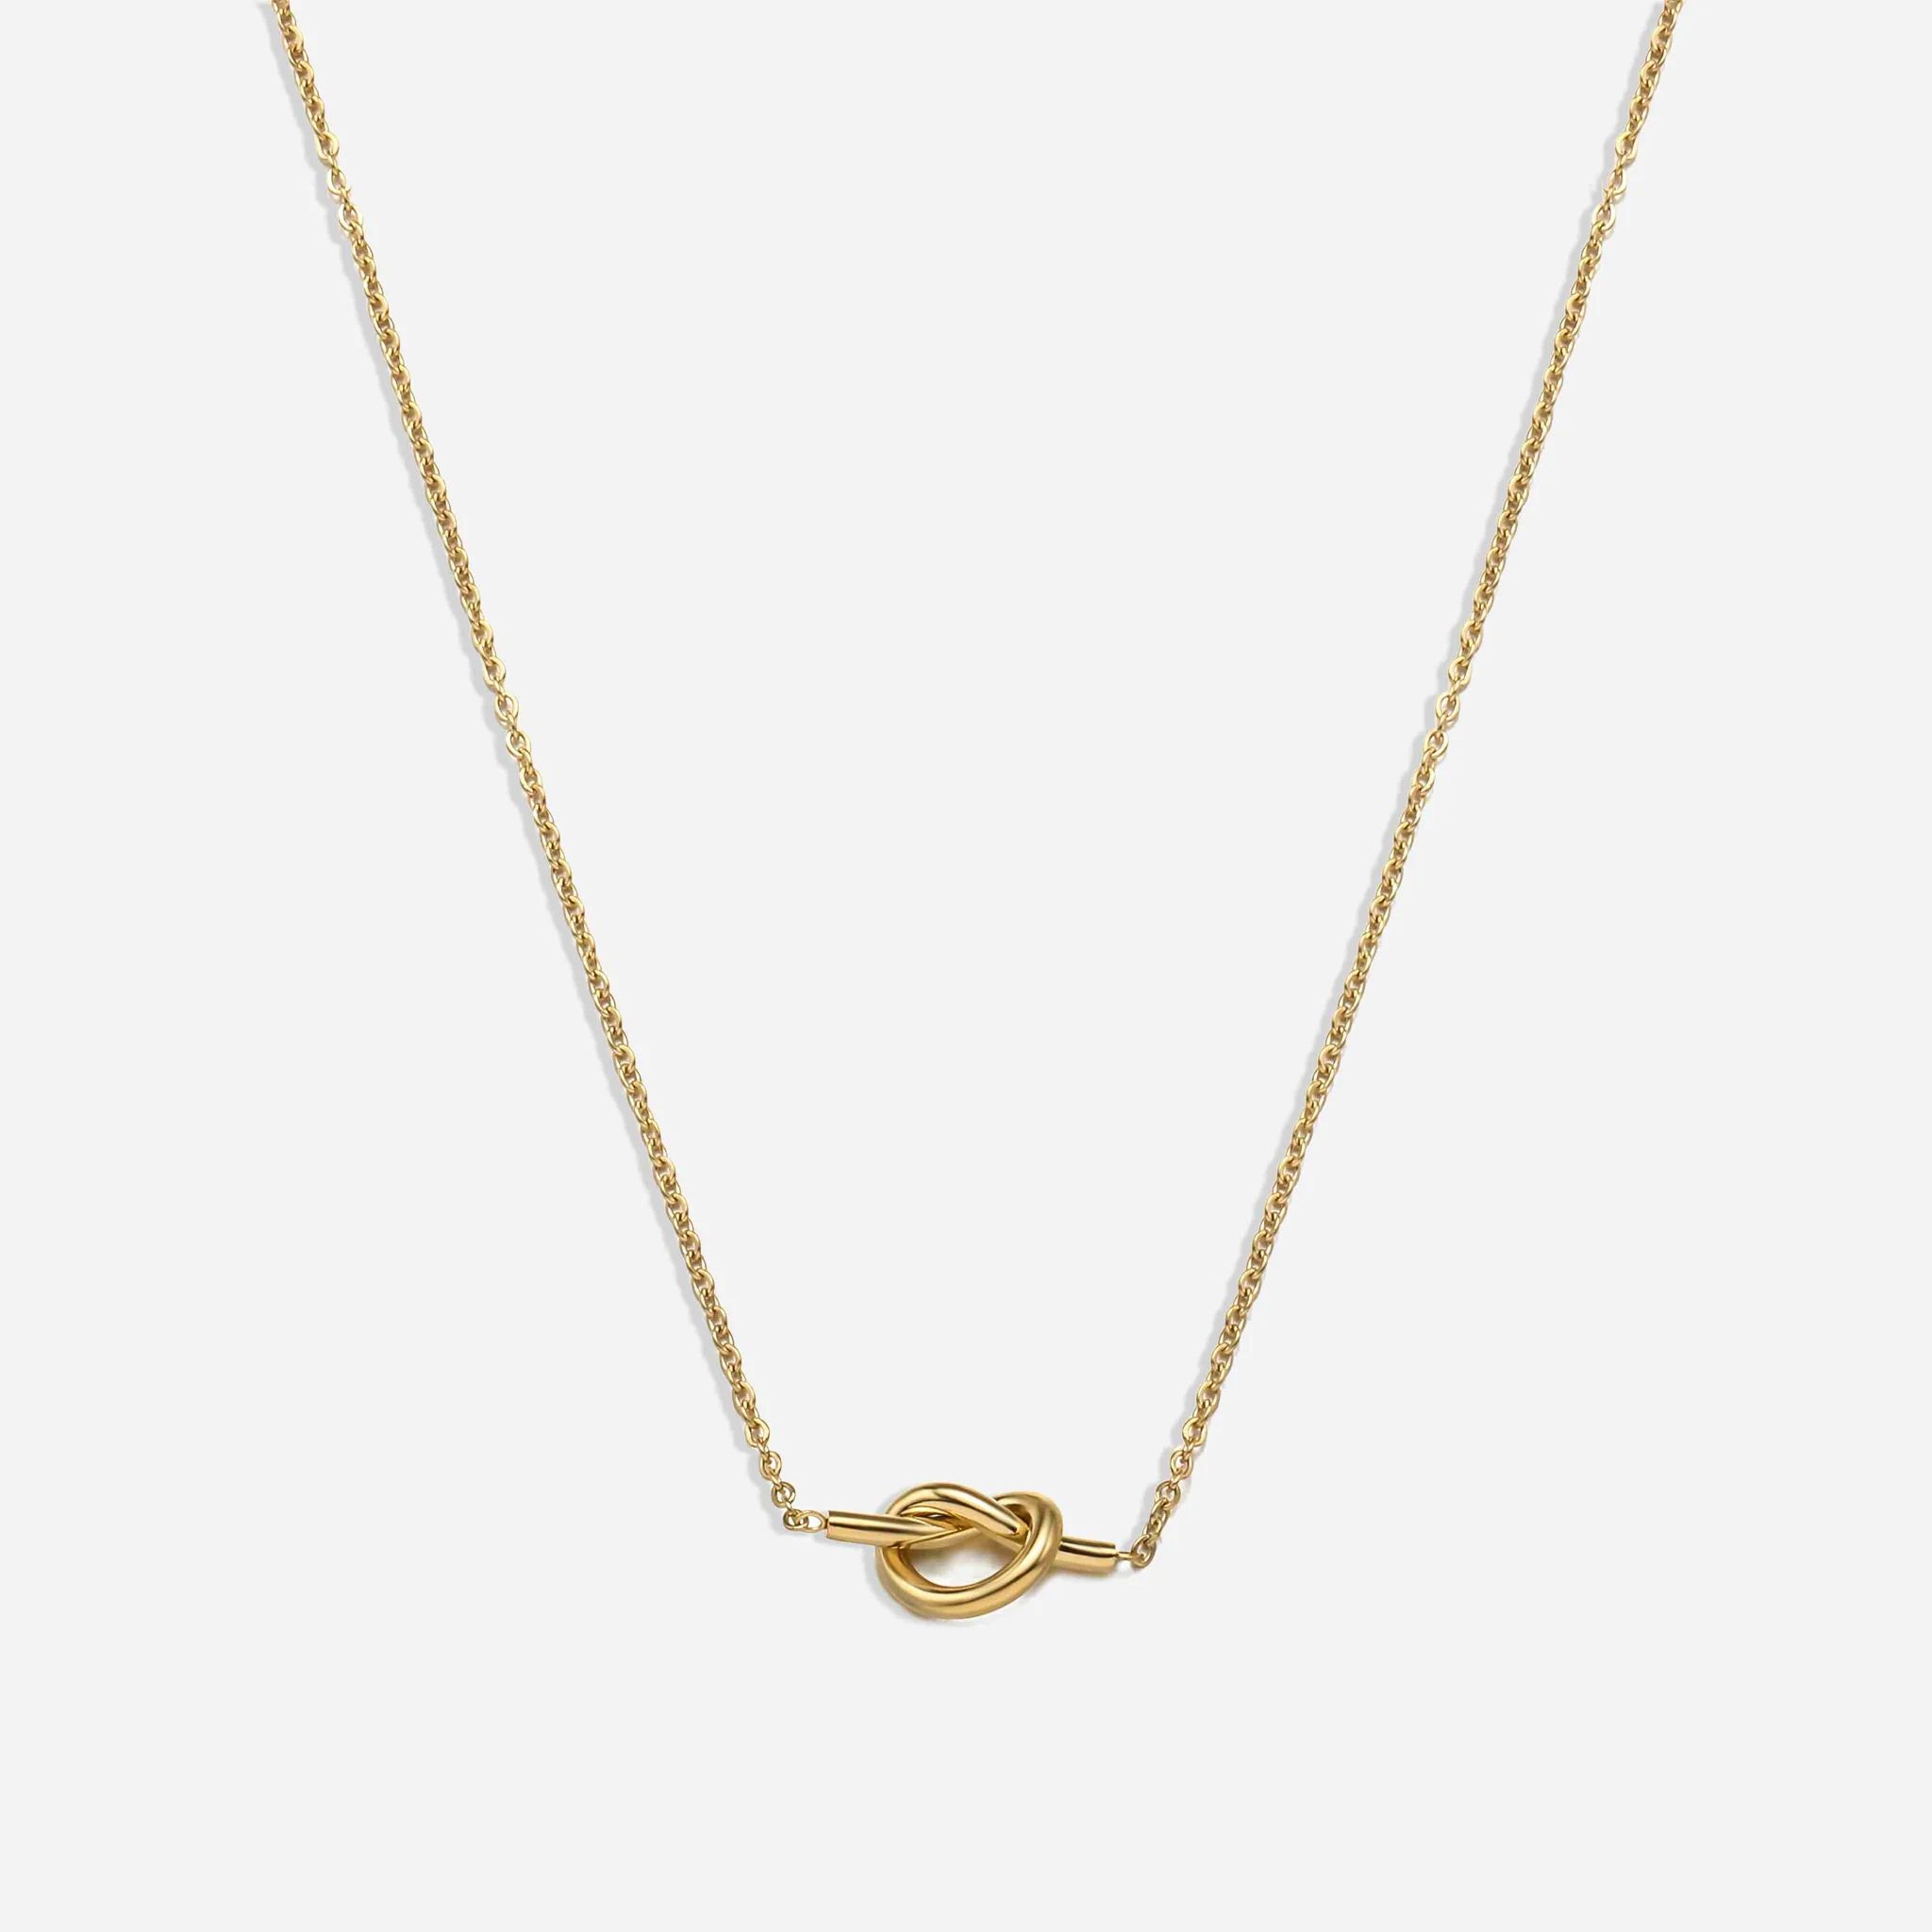 Knotted Pendant Necklace | Victoria Emerson